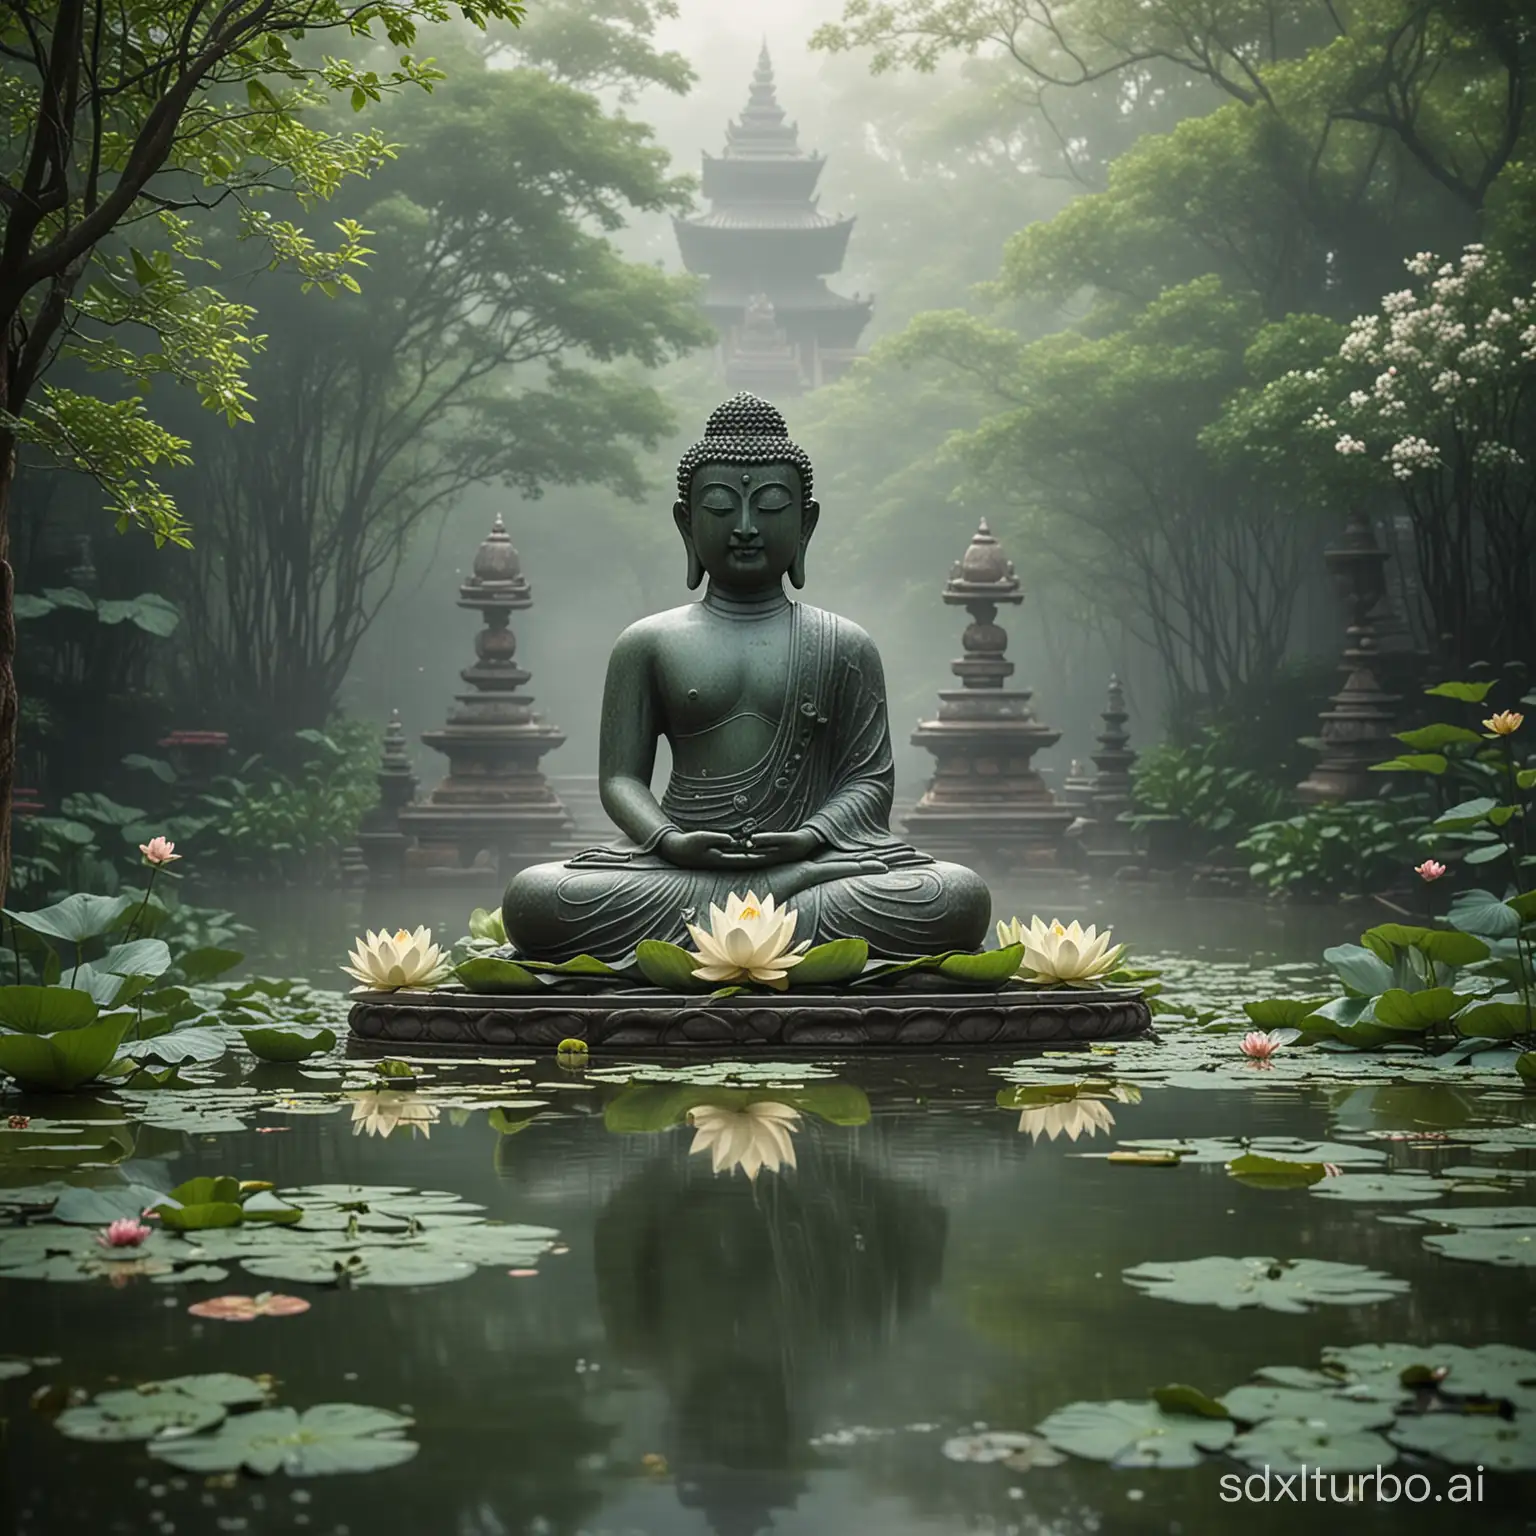 Tranquil-Tibetan-Temple-Backyard-with-Buddha-Statue-and-Blooming-Lotus